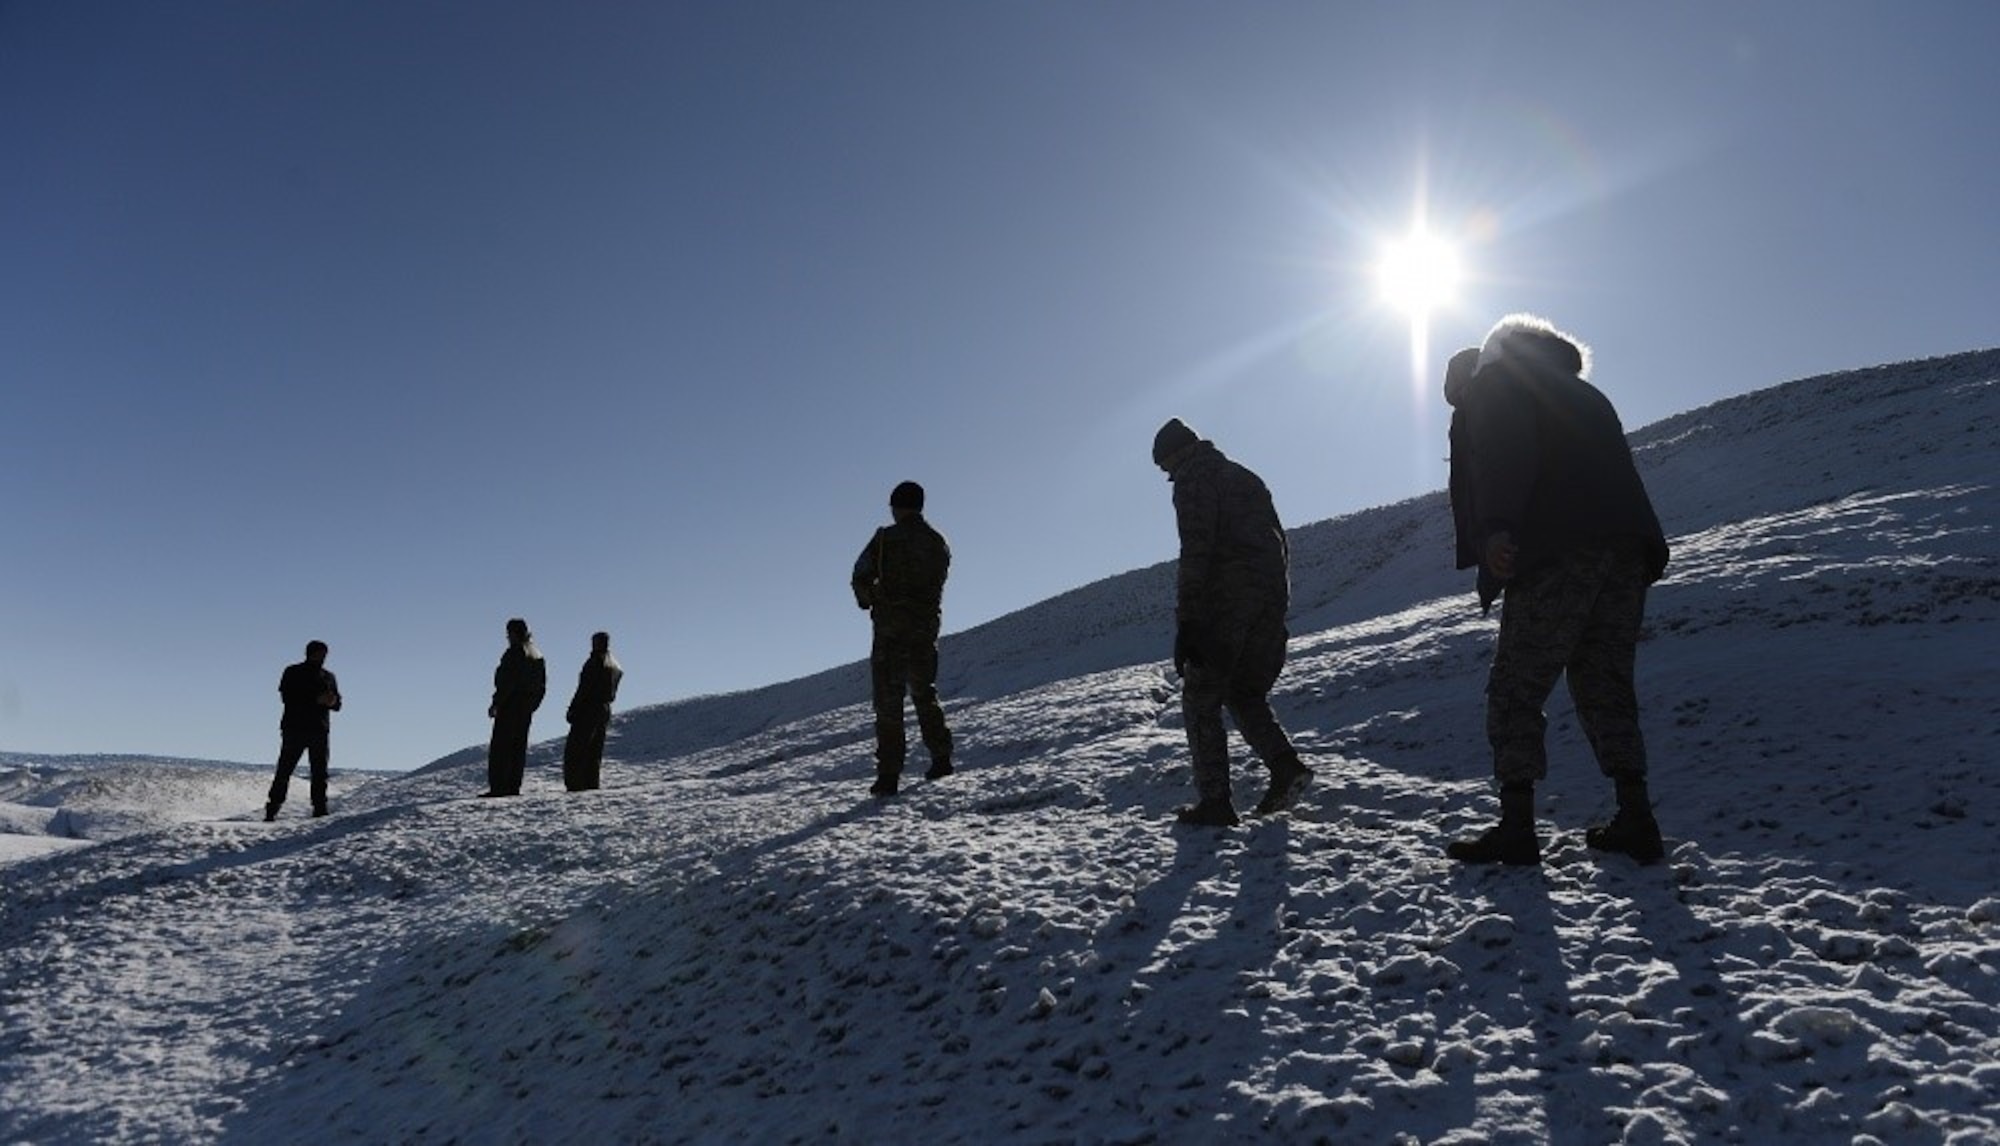 Air Force senior leaders hike on a glacier near Illulissat, Greenland, Sept. 12, 2017. The senior leaders were in Greenland, Canada and Alaska, as part of Operation Uggianaqtuq, an Arctic Security Expedition to better understand the challenges of working in the climate and to build relationships with allies and partners there. (U.S. Air Force photo by Tech. Sgt. Dan DeCook)